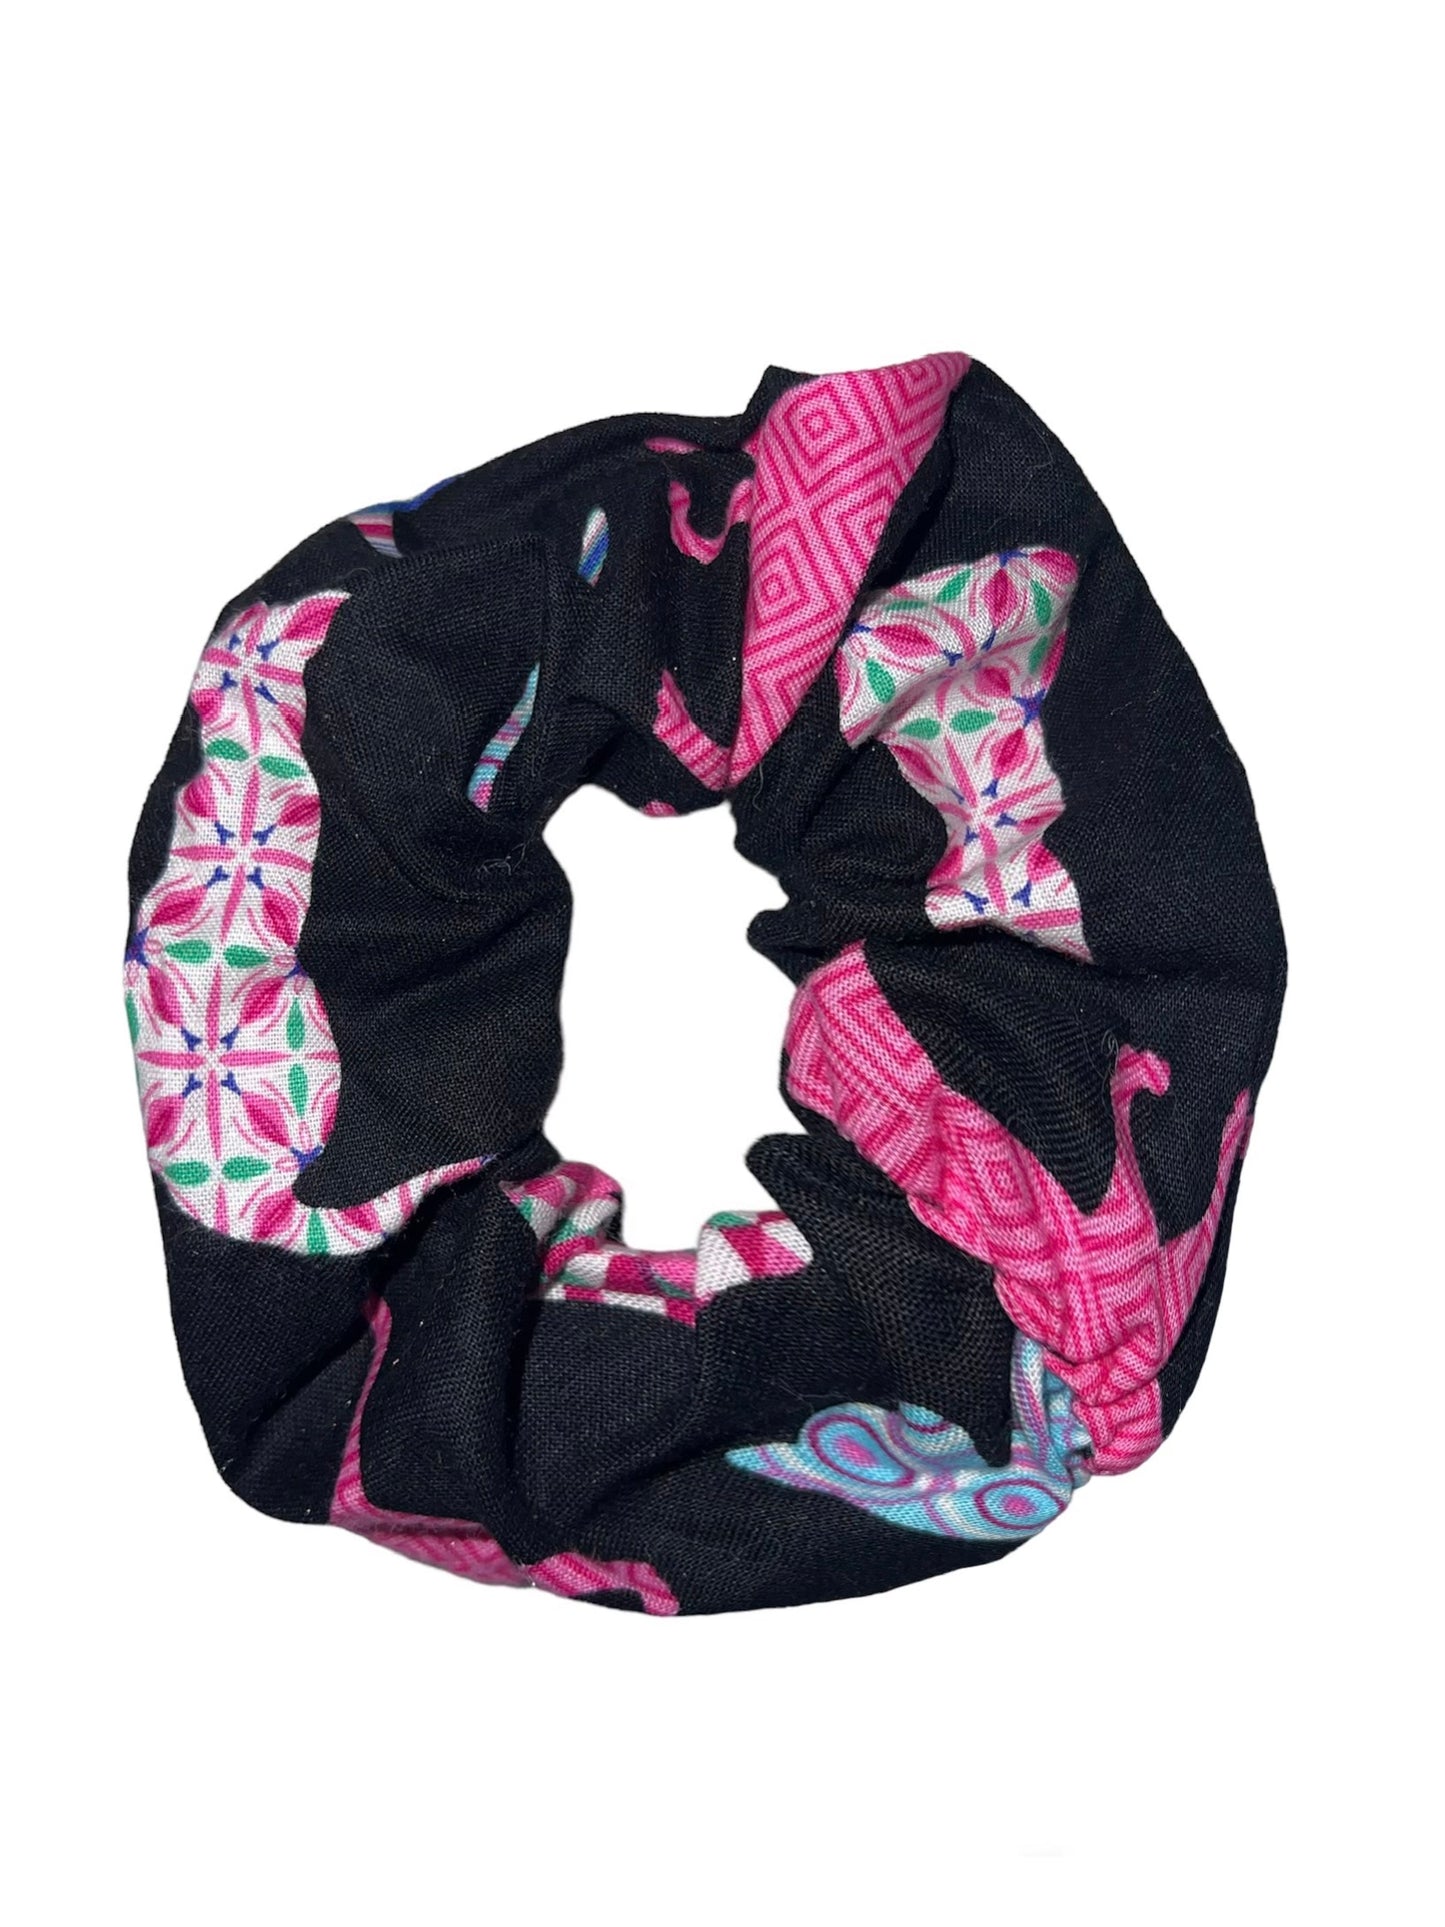 Tied Together Geometric Patterned Cats scrunchie